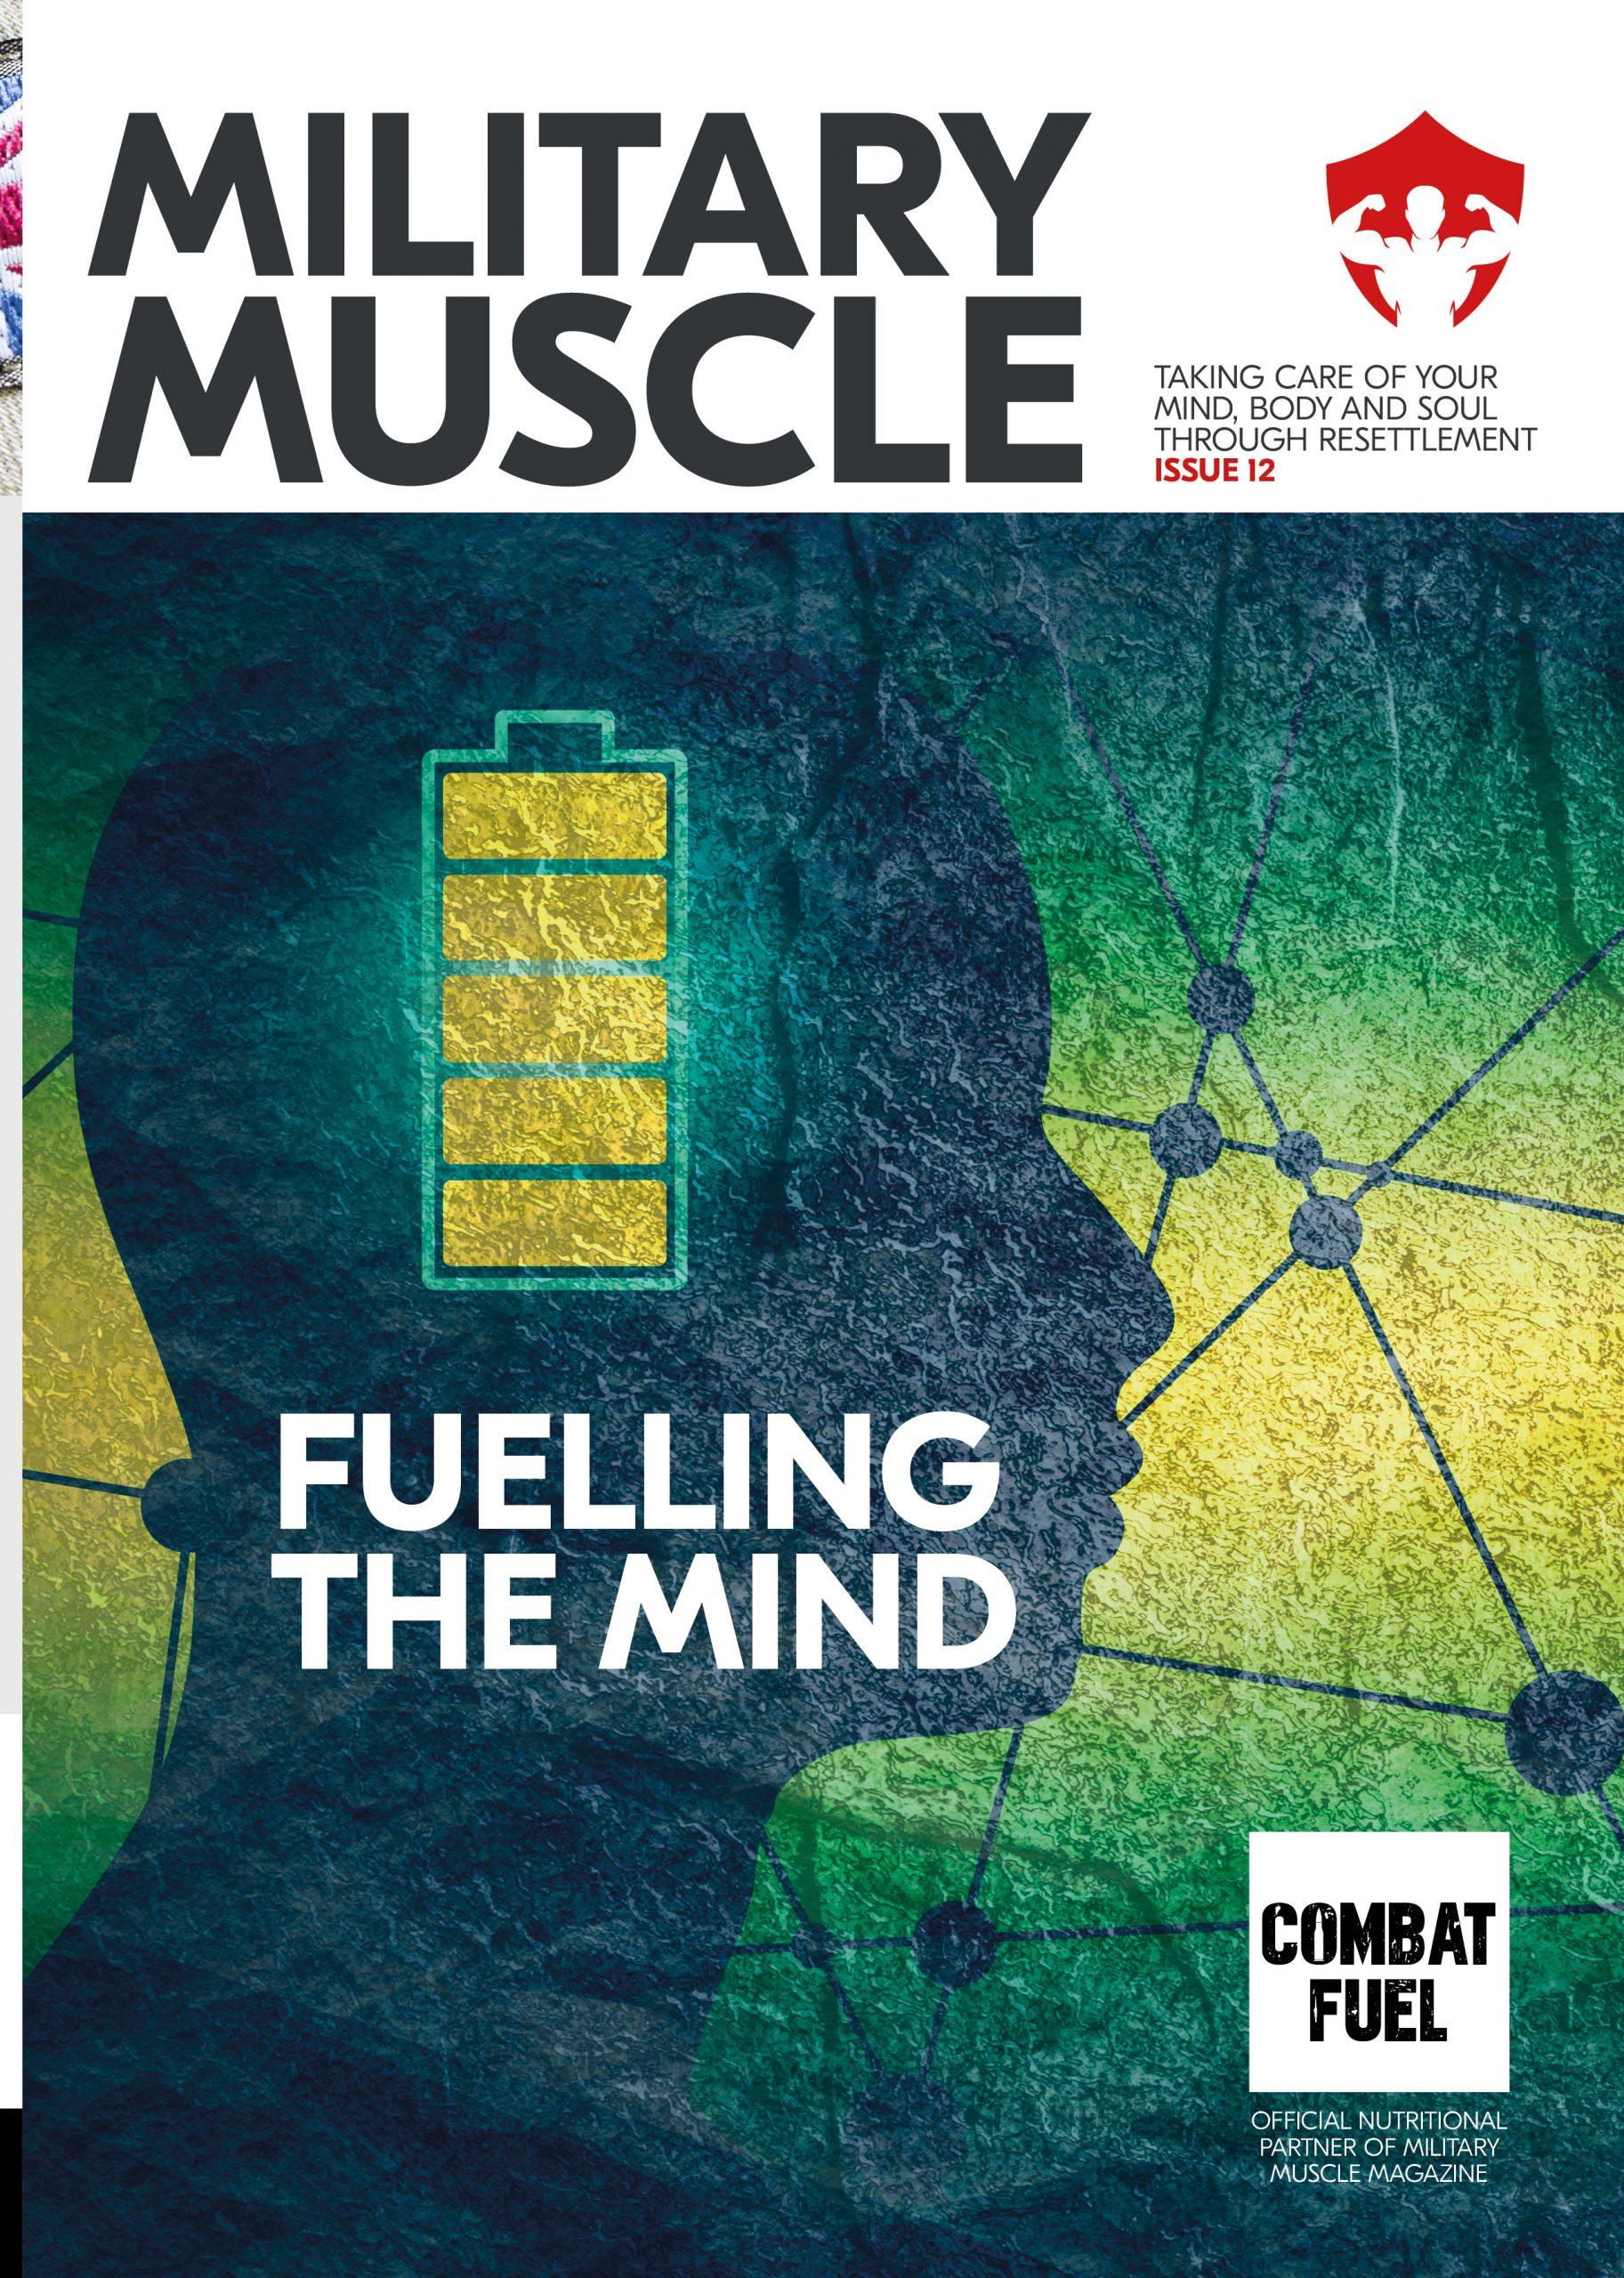 Military Muscle Magazine Teams Up With Combat Fuel To Deliver A Powerful Combination For The Forces Community